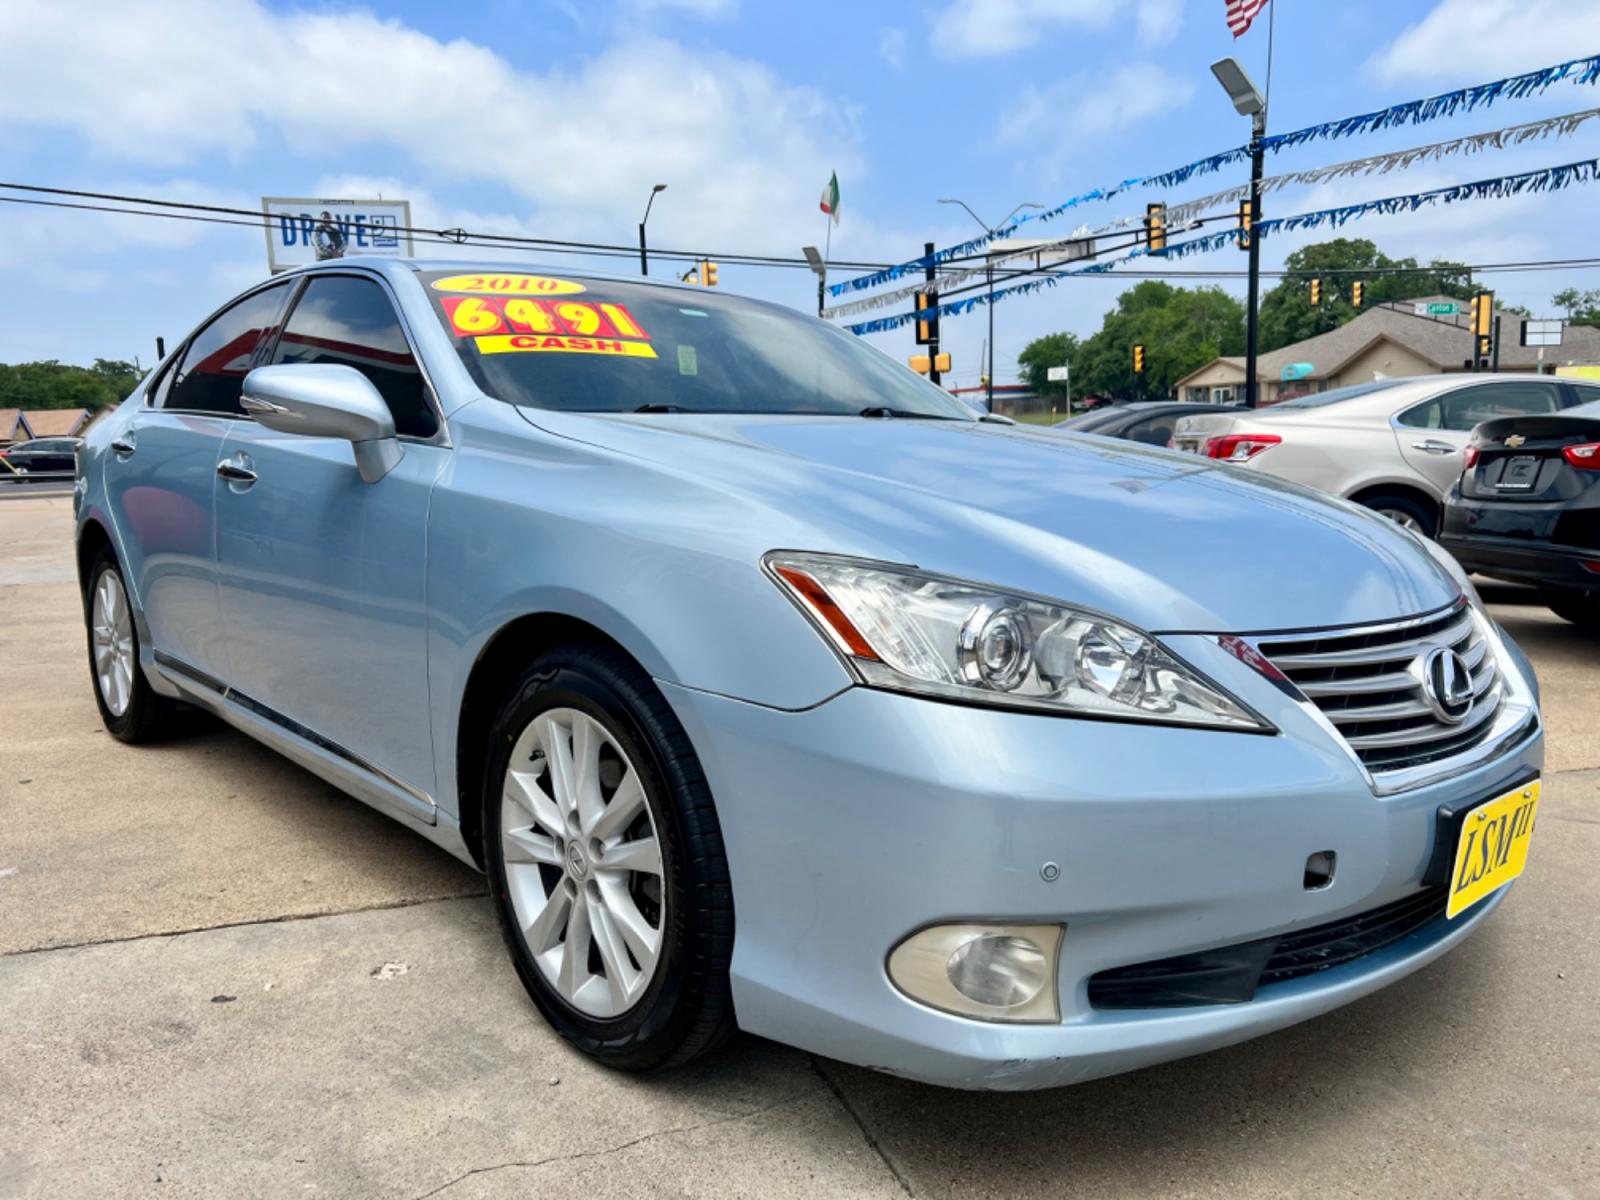 2010 BLUE /Tan LEXUS ES 350 BASE Base 4dr Sedan (JTHBK1EG3A2) with an 3.5L V6 engine, Automatic 6-Speed transmission, located at 5900 E. Lancaster Ave., Fort Worth, TX, 76112, (817) 457-5456, 0.000000, 0.000000 - Cash CASH CAR ONLY, NO FINANCING AVAILABLE. THIS 2010 LEXUS ES 350 BASE 4 DOOR SEDAN RUNS AND DRIVES GREAT. IT IS EQUIPPED WITH A CD PLAYER, AM/FM RADIO AND AN AUX PORT. THE TIRES ARE IN GOOD CONDITION AND STILL HAVE TREAD LEFT ON THEM. THIS CAR WILL NOT LAST SO ACT FAST! Call or text Fran - Photo #8